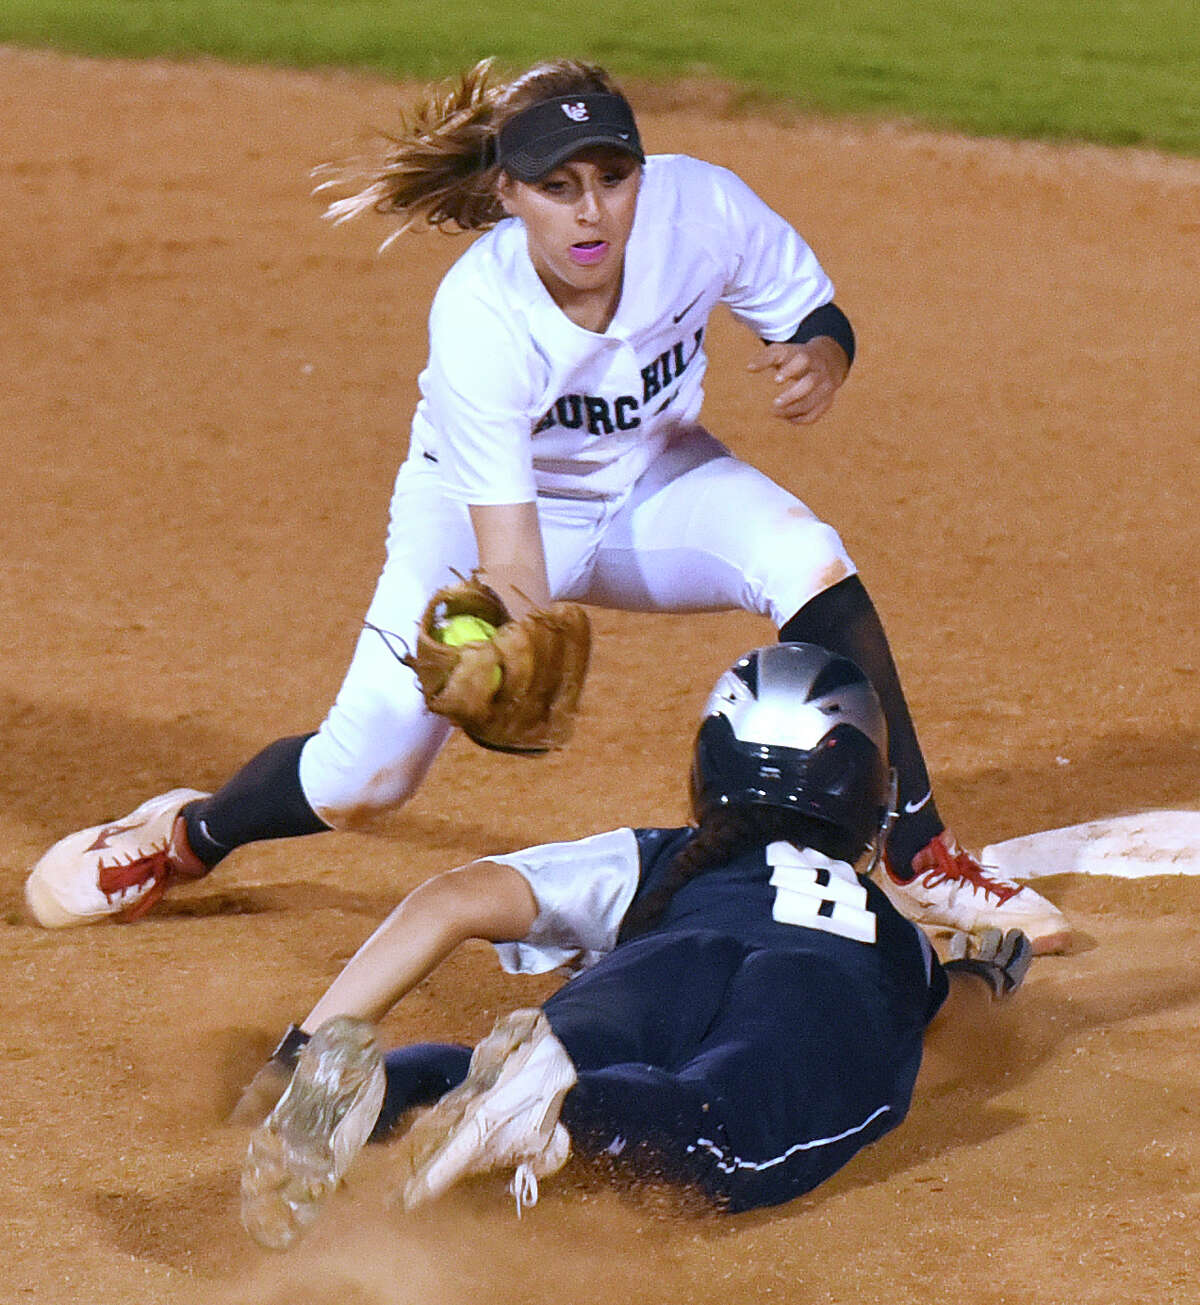 Churchill shortstop Abby White tags out Monique McElroy of Smithson Valley as she attempts to steal second base during UIL Class 6A first-round high school playoffs action at the SAISD complex on Wednesday, April 29, 2015.